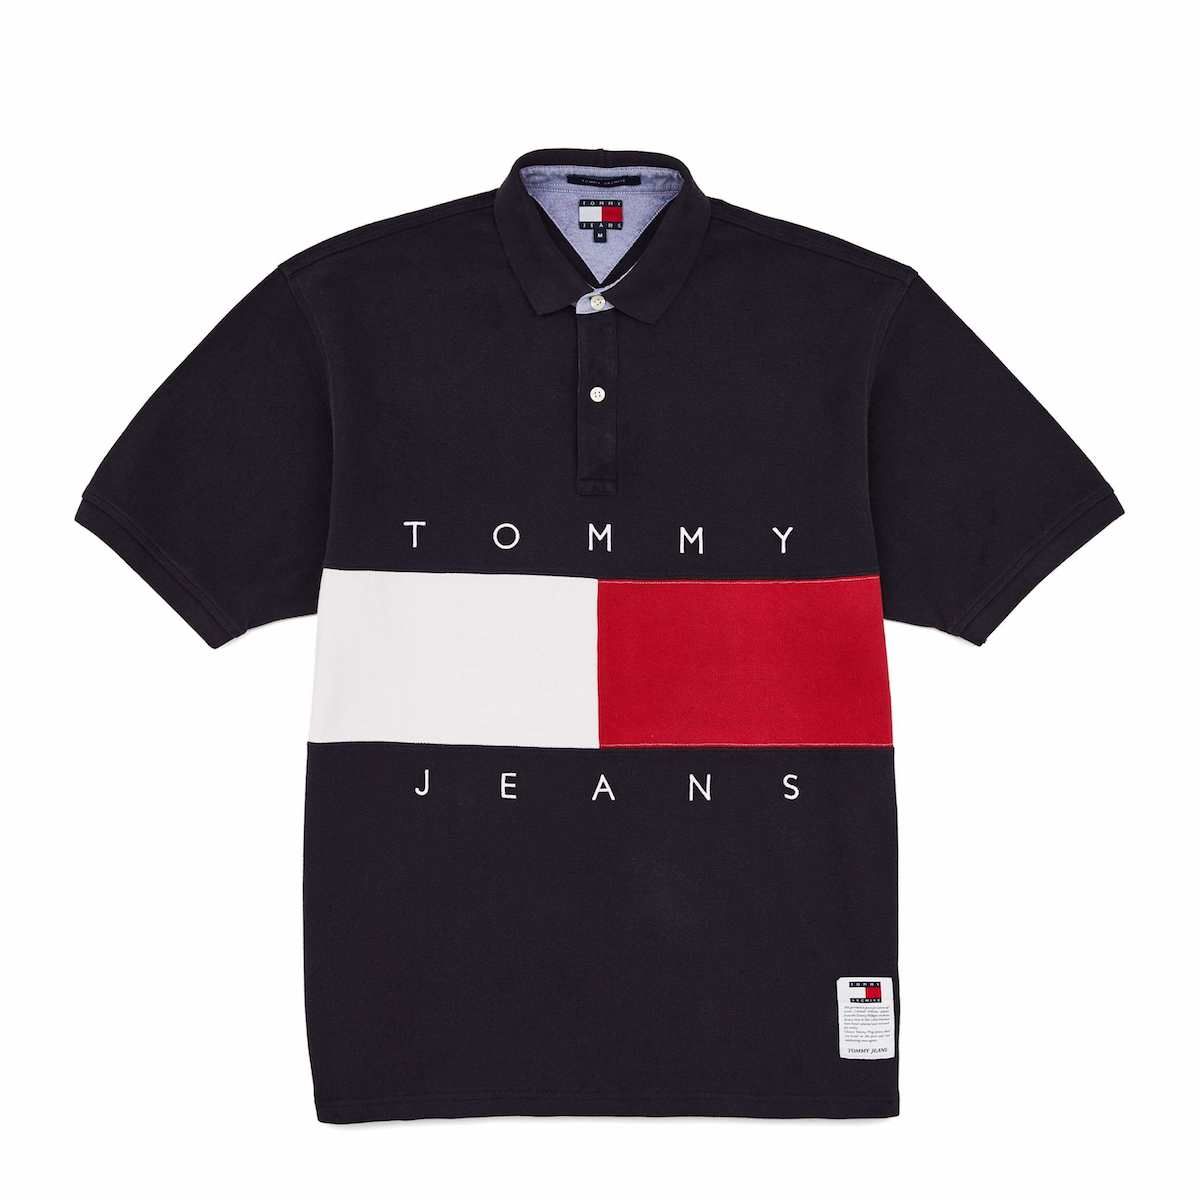 Tommy Hilfiger goes into the archive - HIGHXTAR.